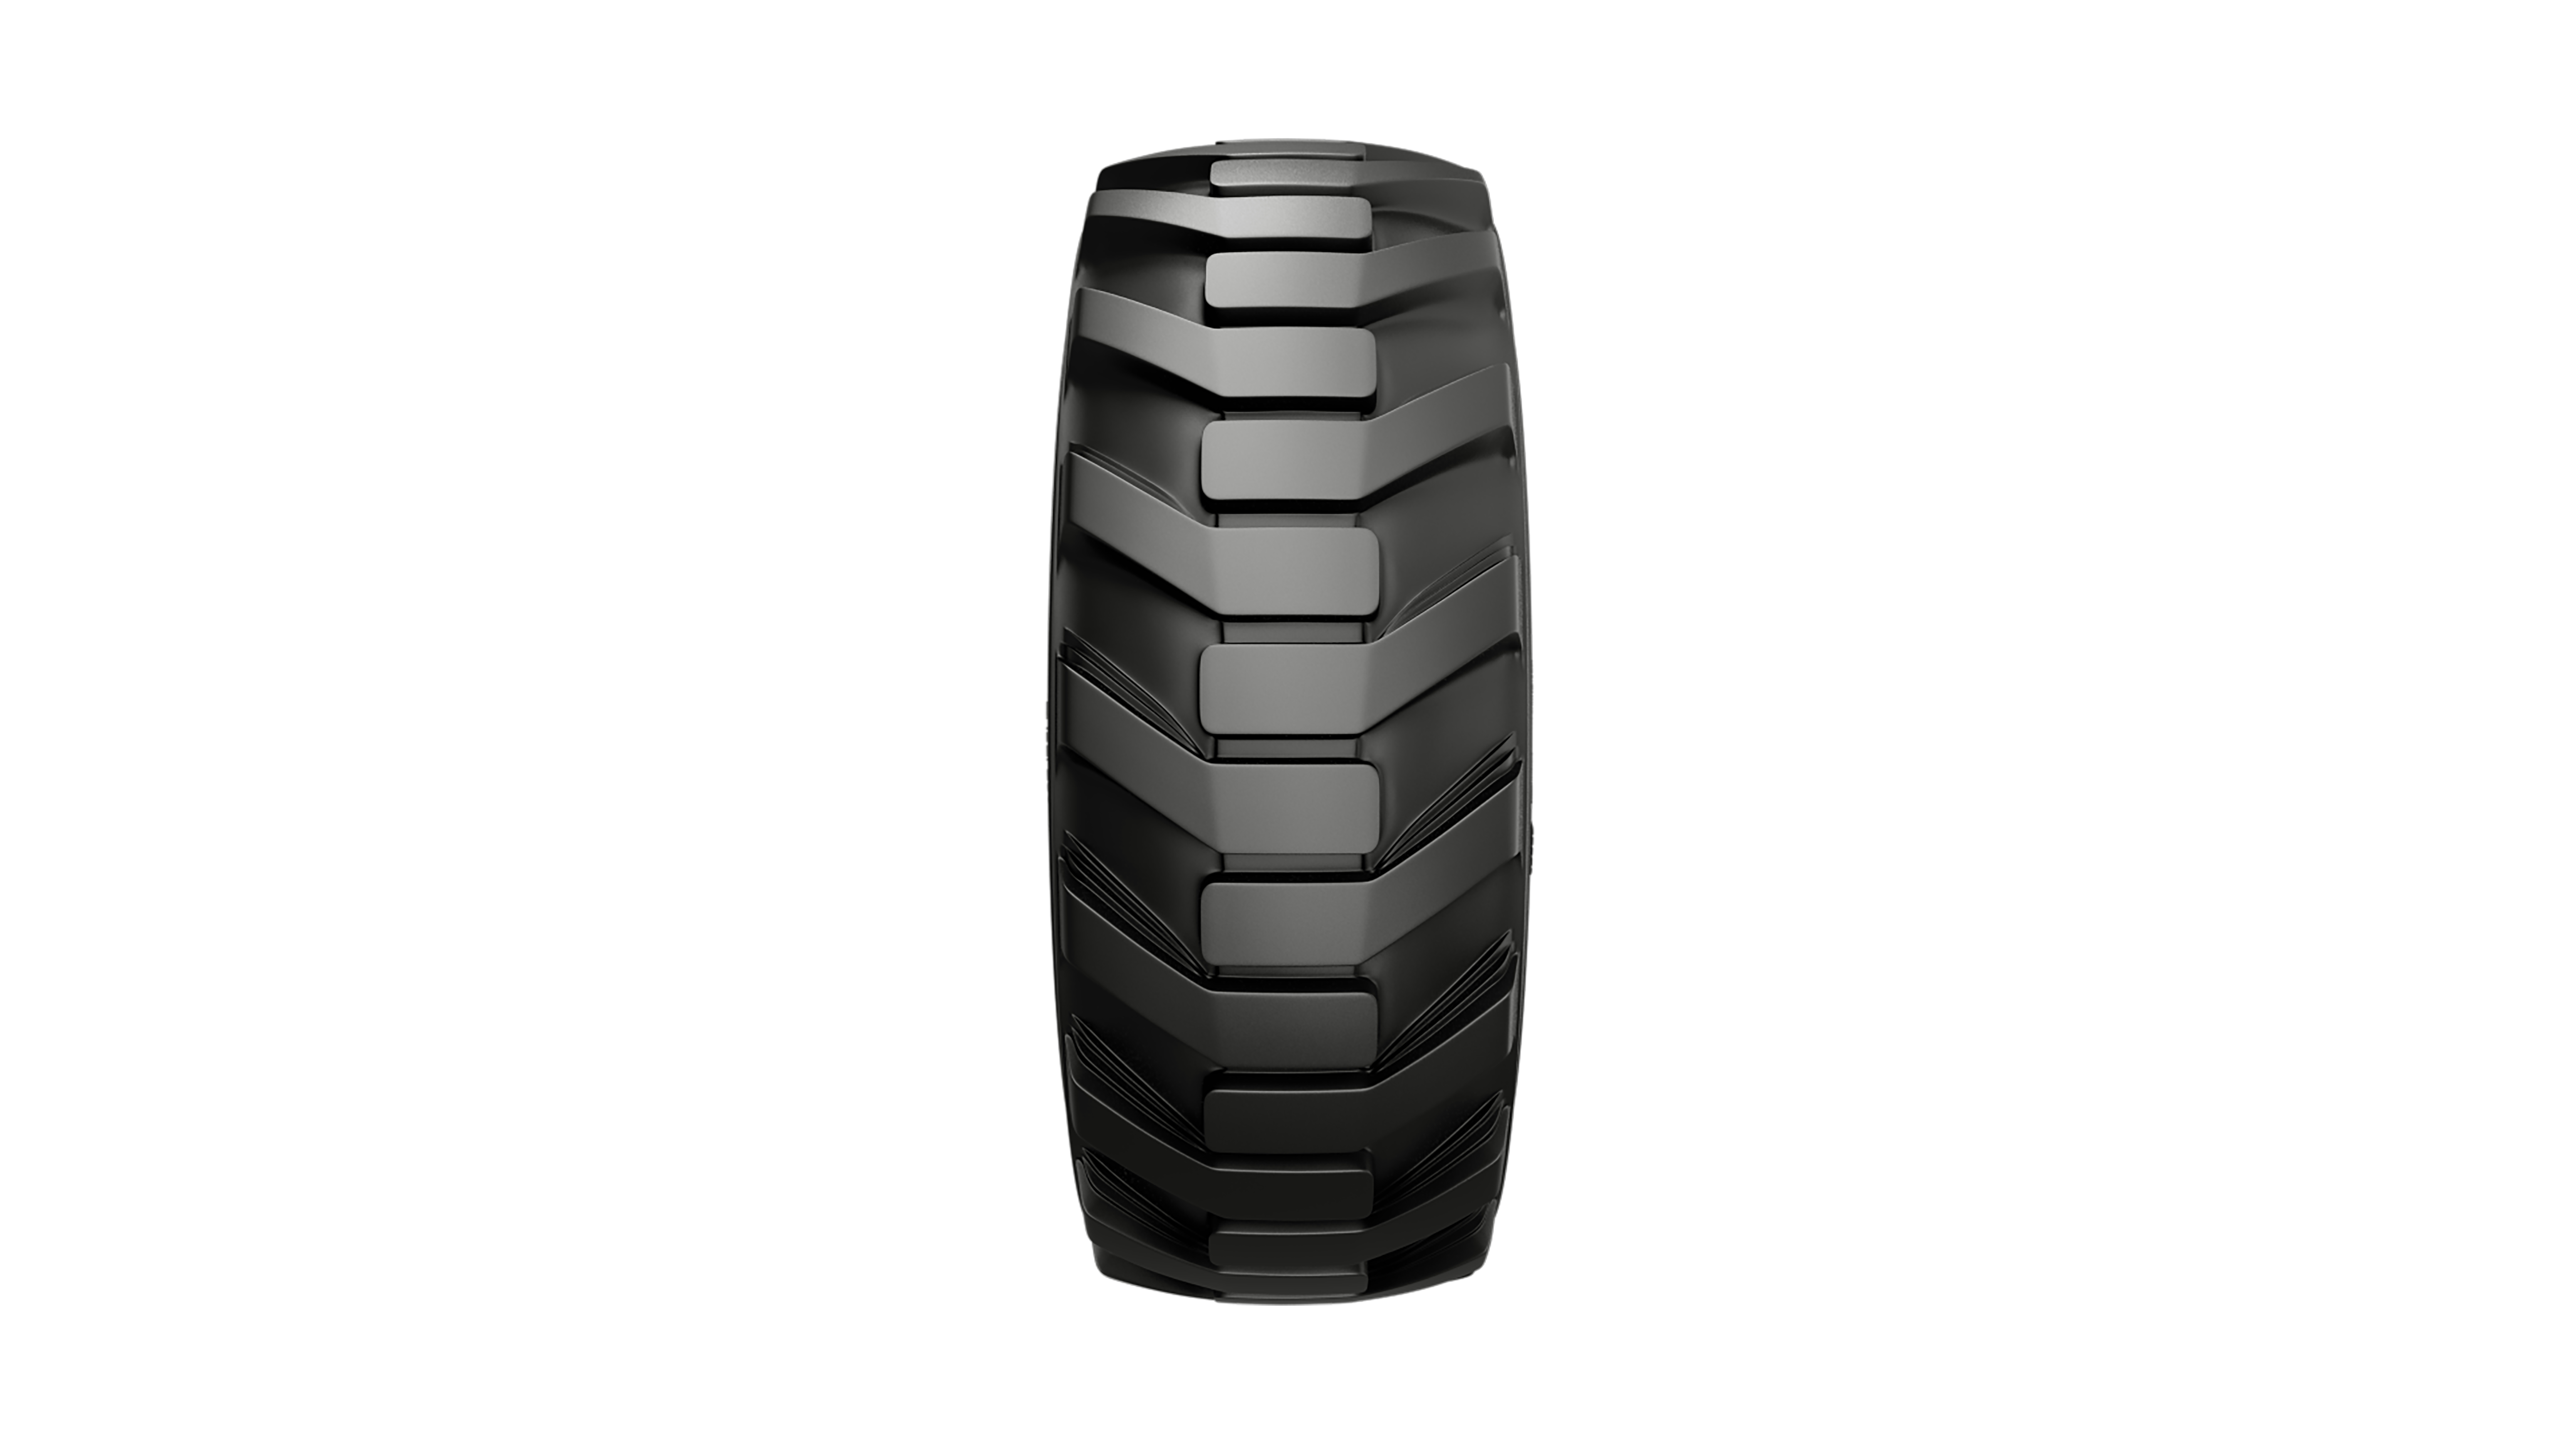 SK-906 ALLIANCE CONSTRUCTION & INDUSTRIAL Tire